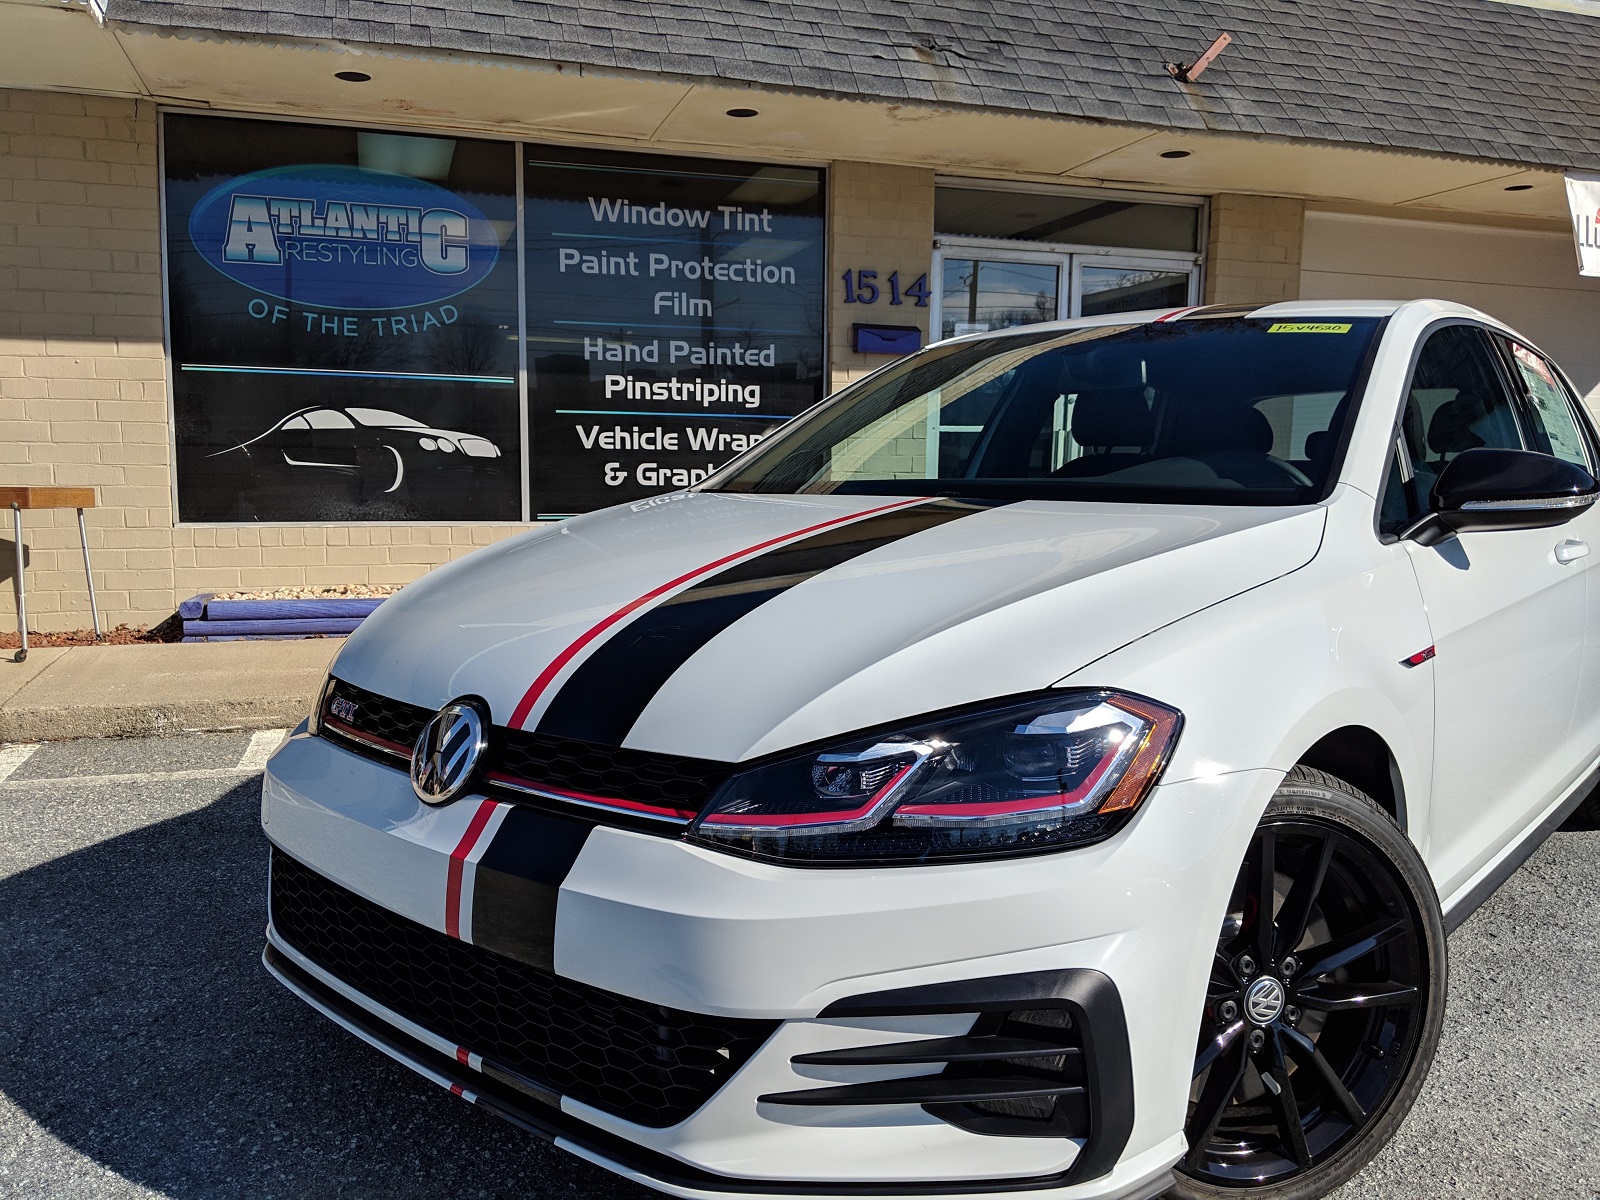 VW graphics and paint protection film